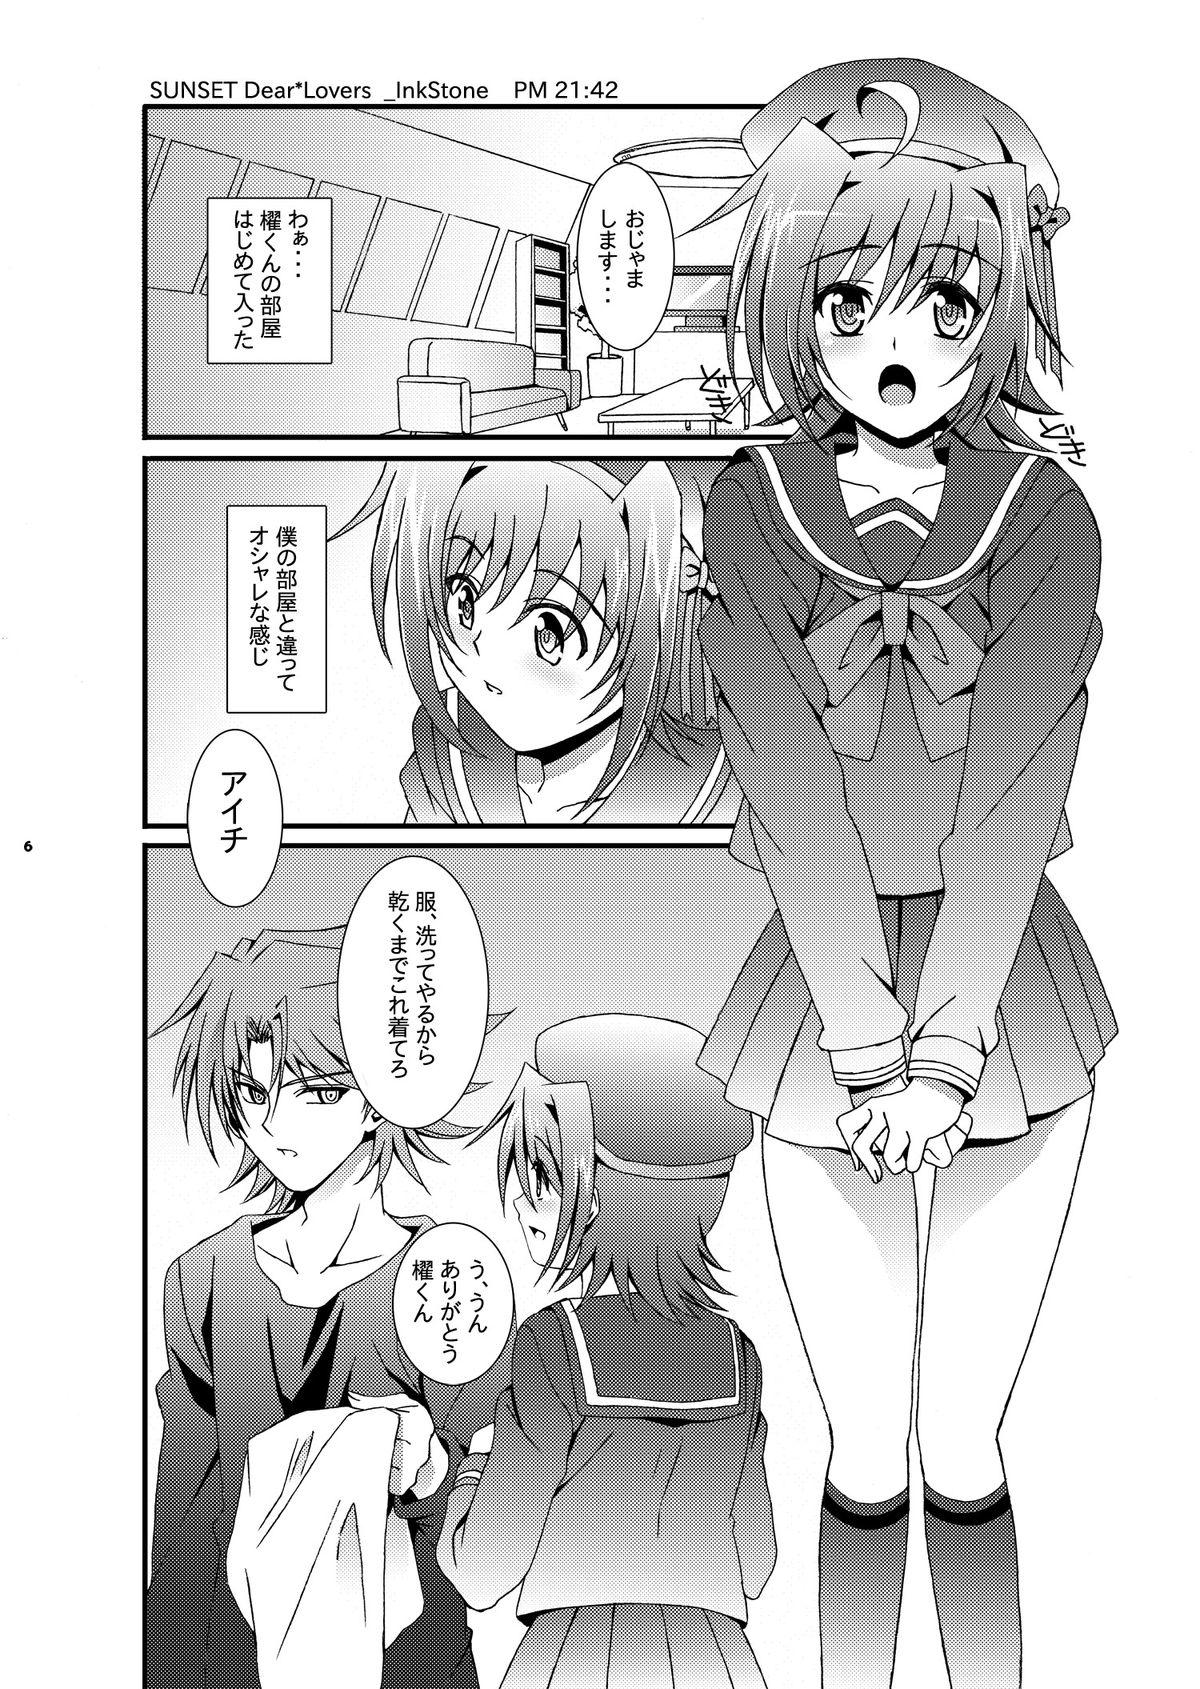 Khmer SUNSET Dear Lovers - Cardfight vanguard Daddy - Page 7